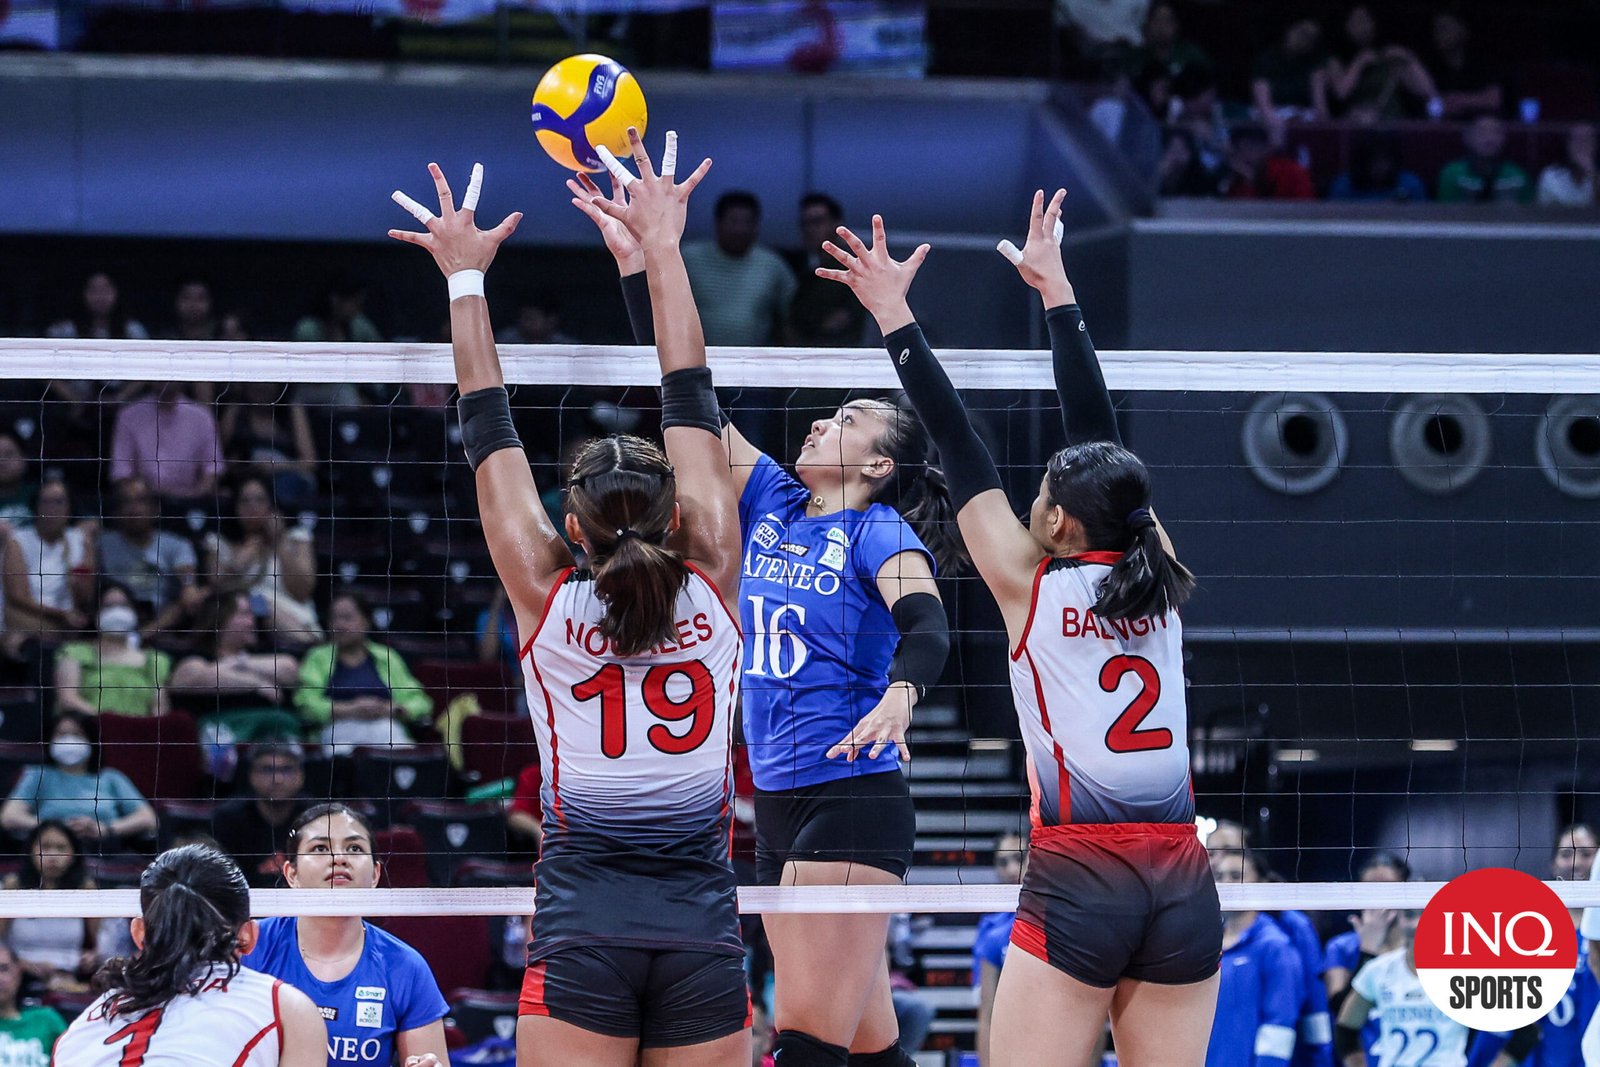 With UAAP Final Four set, Ateneo hopes to lock up fifth place